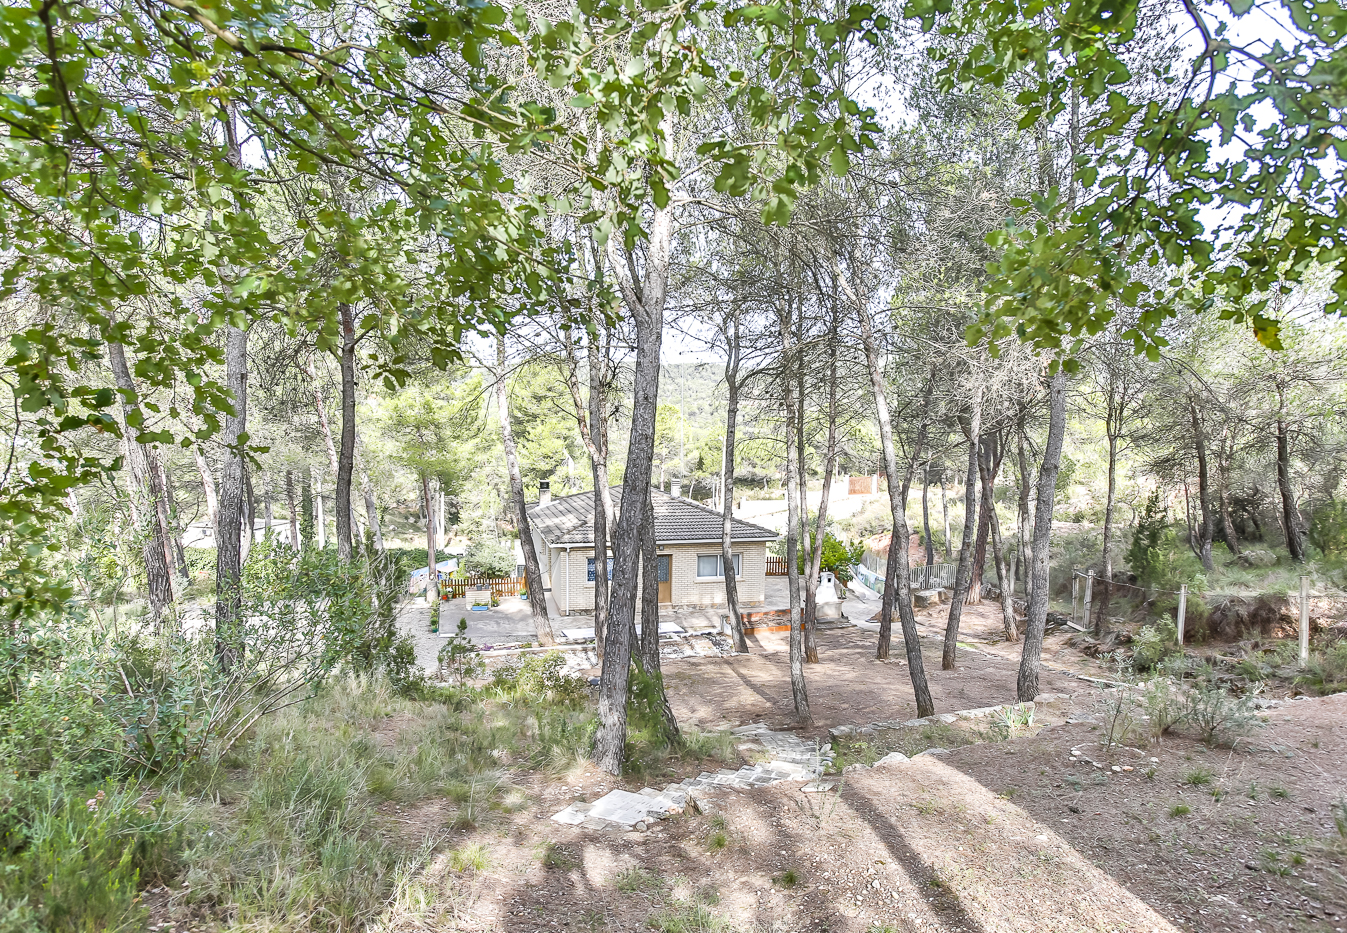 Country house for sale near Igualada, with the possibility of expanding the house